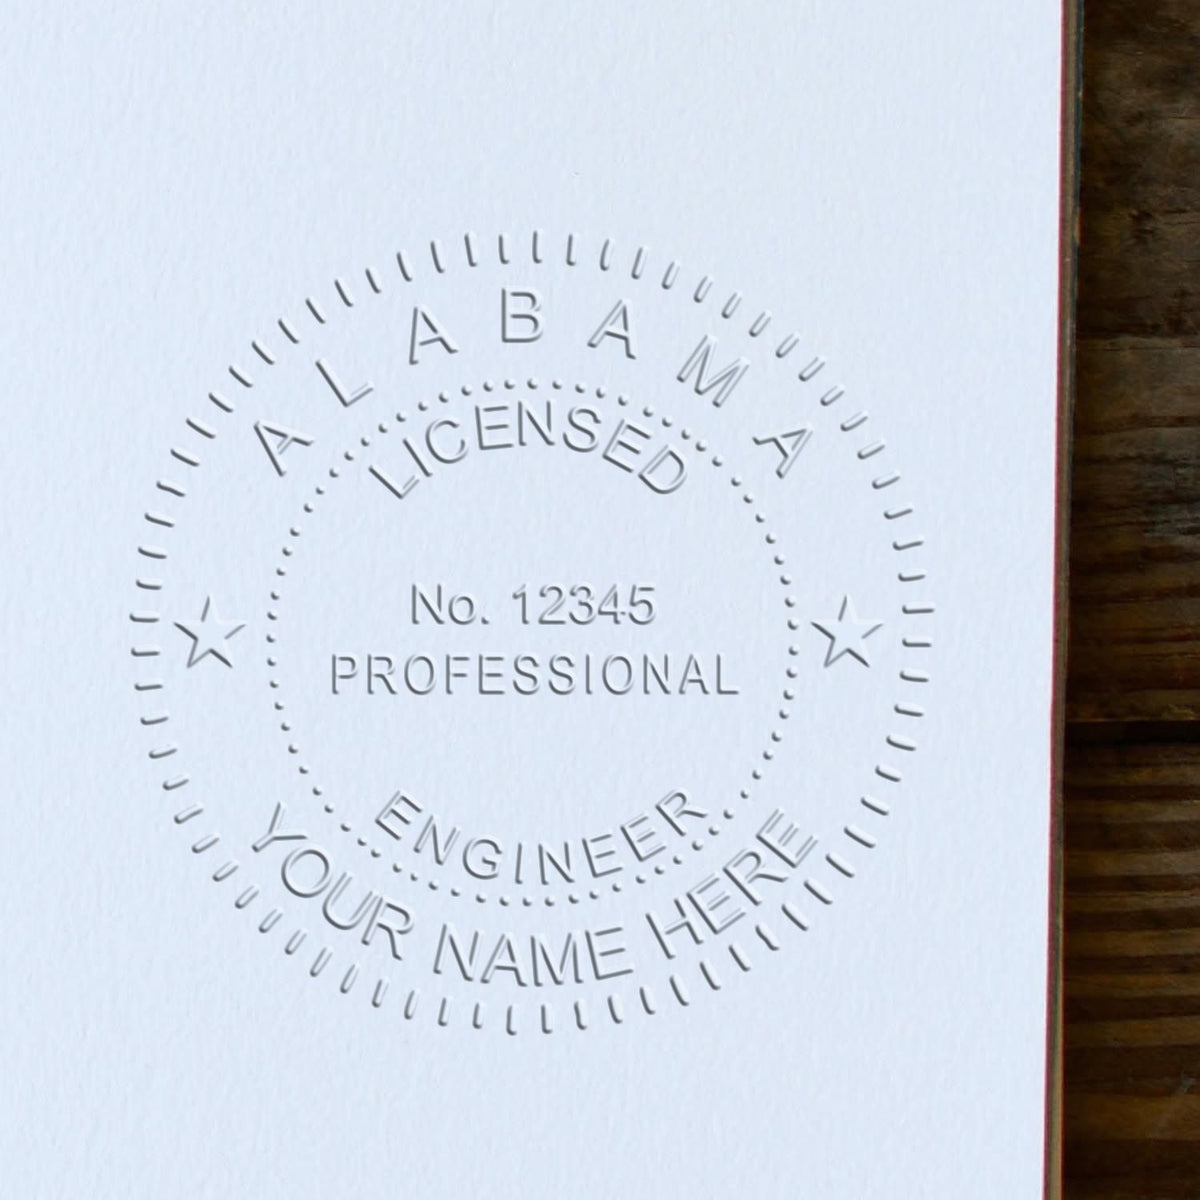 A stamped impression of the Soft Alabama Professional Engineer Seal in this stylish lifestyle photo, setting the tone for a unique and personalized product.